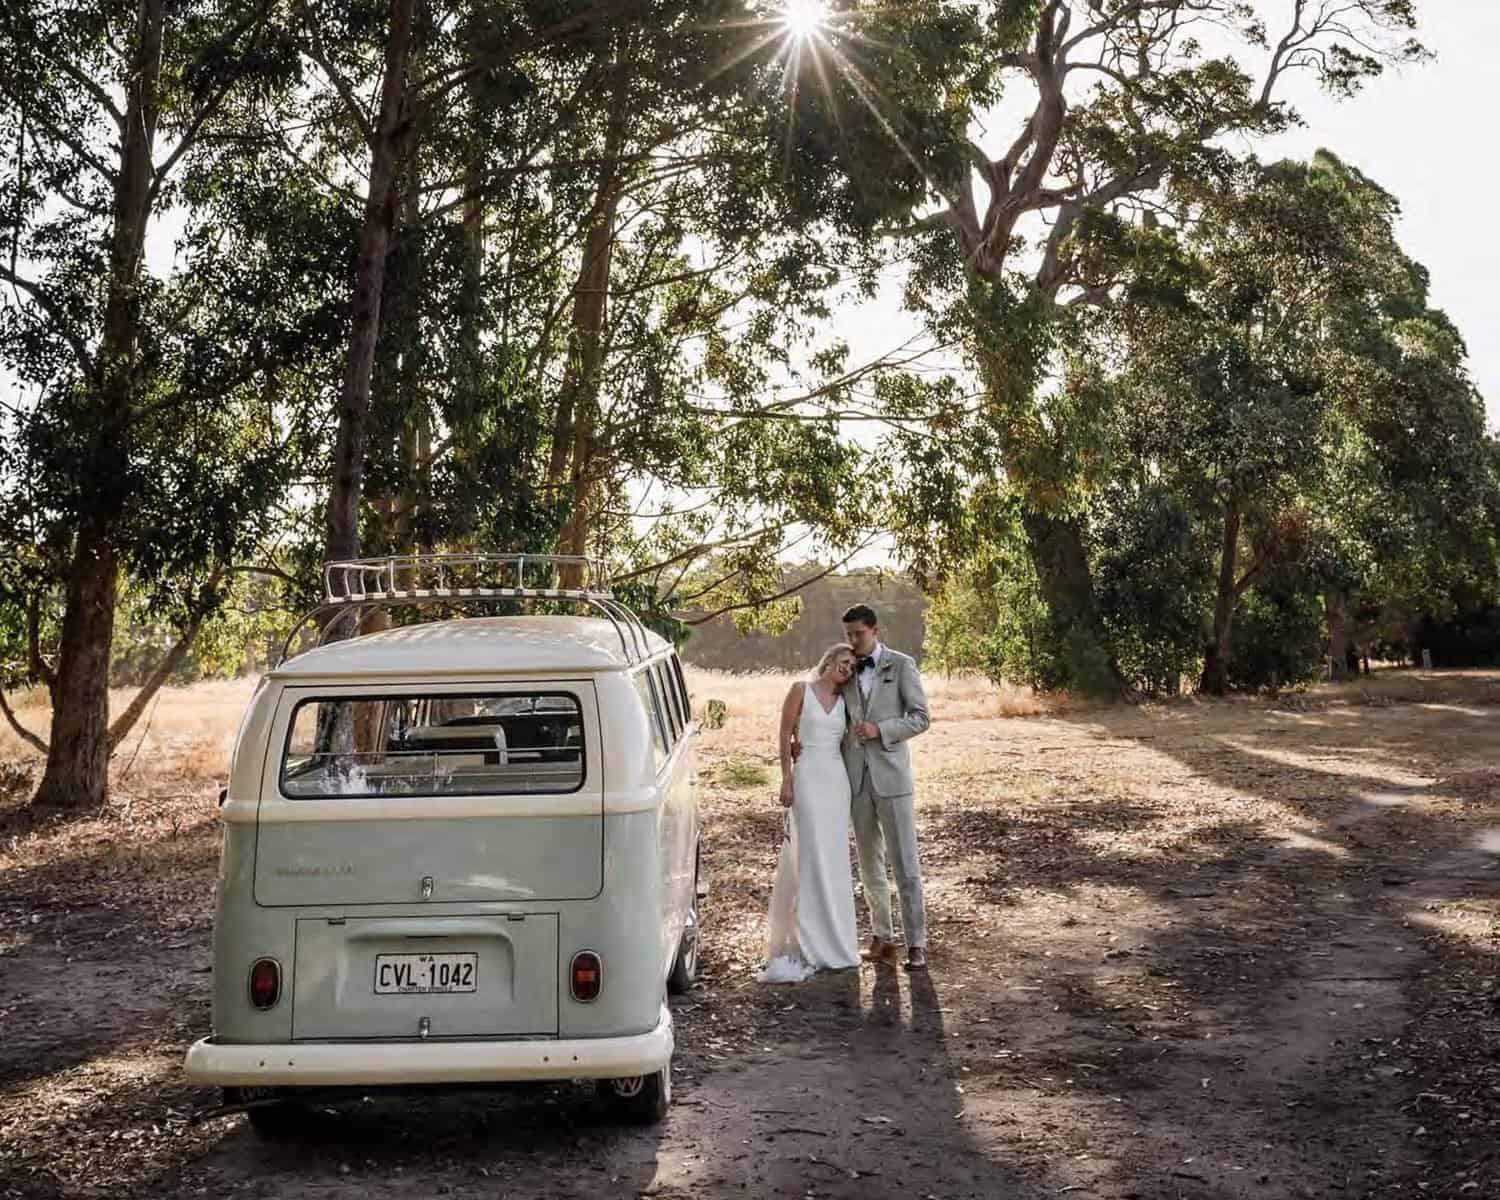 A joyful couple standing together next to a charming vintage van, set against the picturesque backdrop of Margaret River's lush greenery, perfectly capturing the beauty of a Margaret River wedding venue.